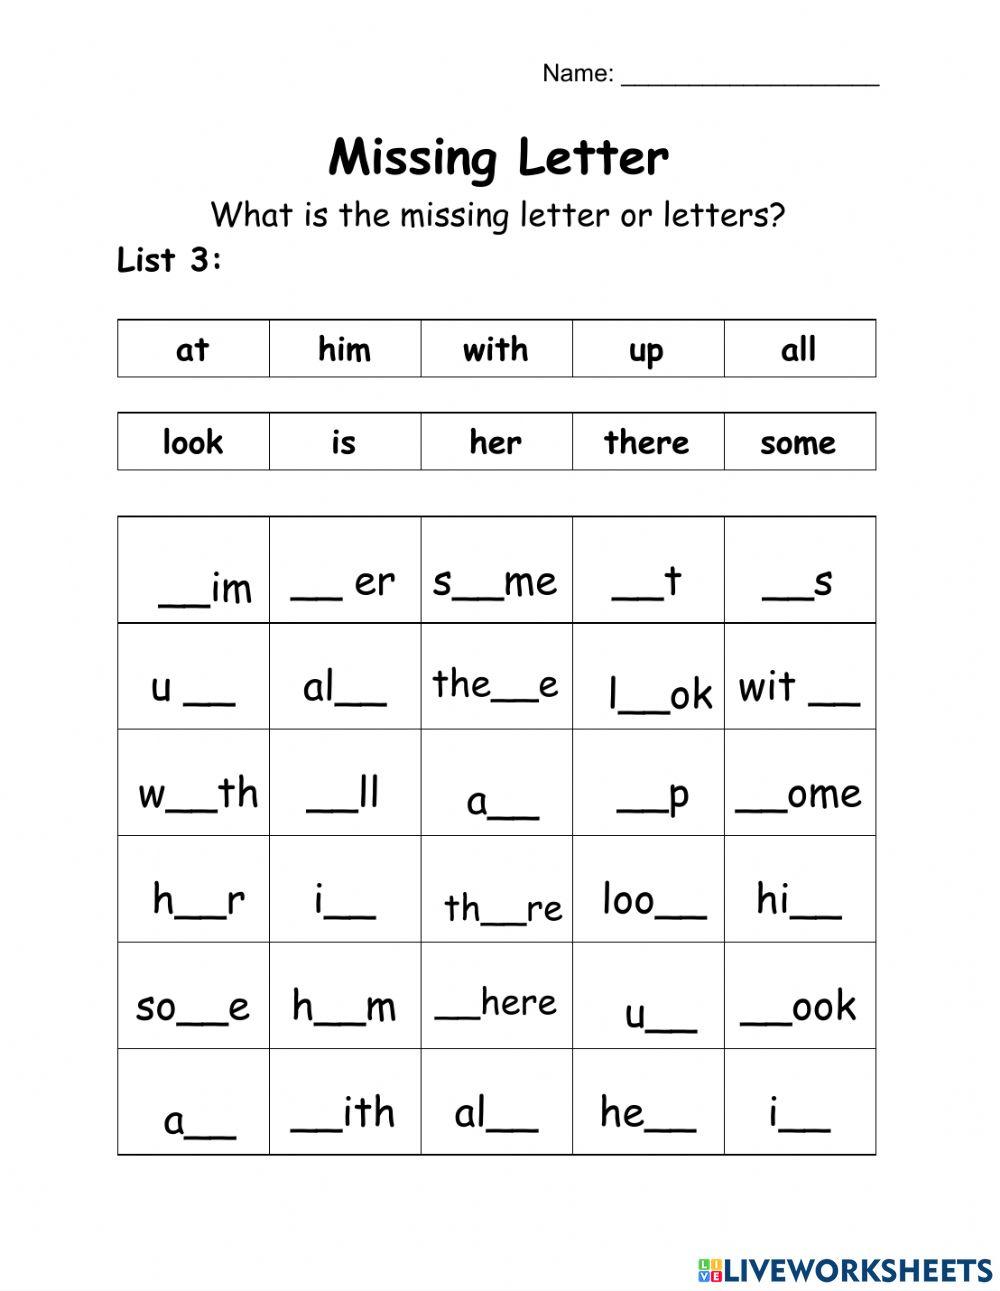 Words of the Week - 10 Words - List 2 - Missing Letter